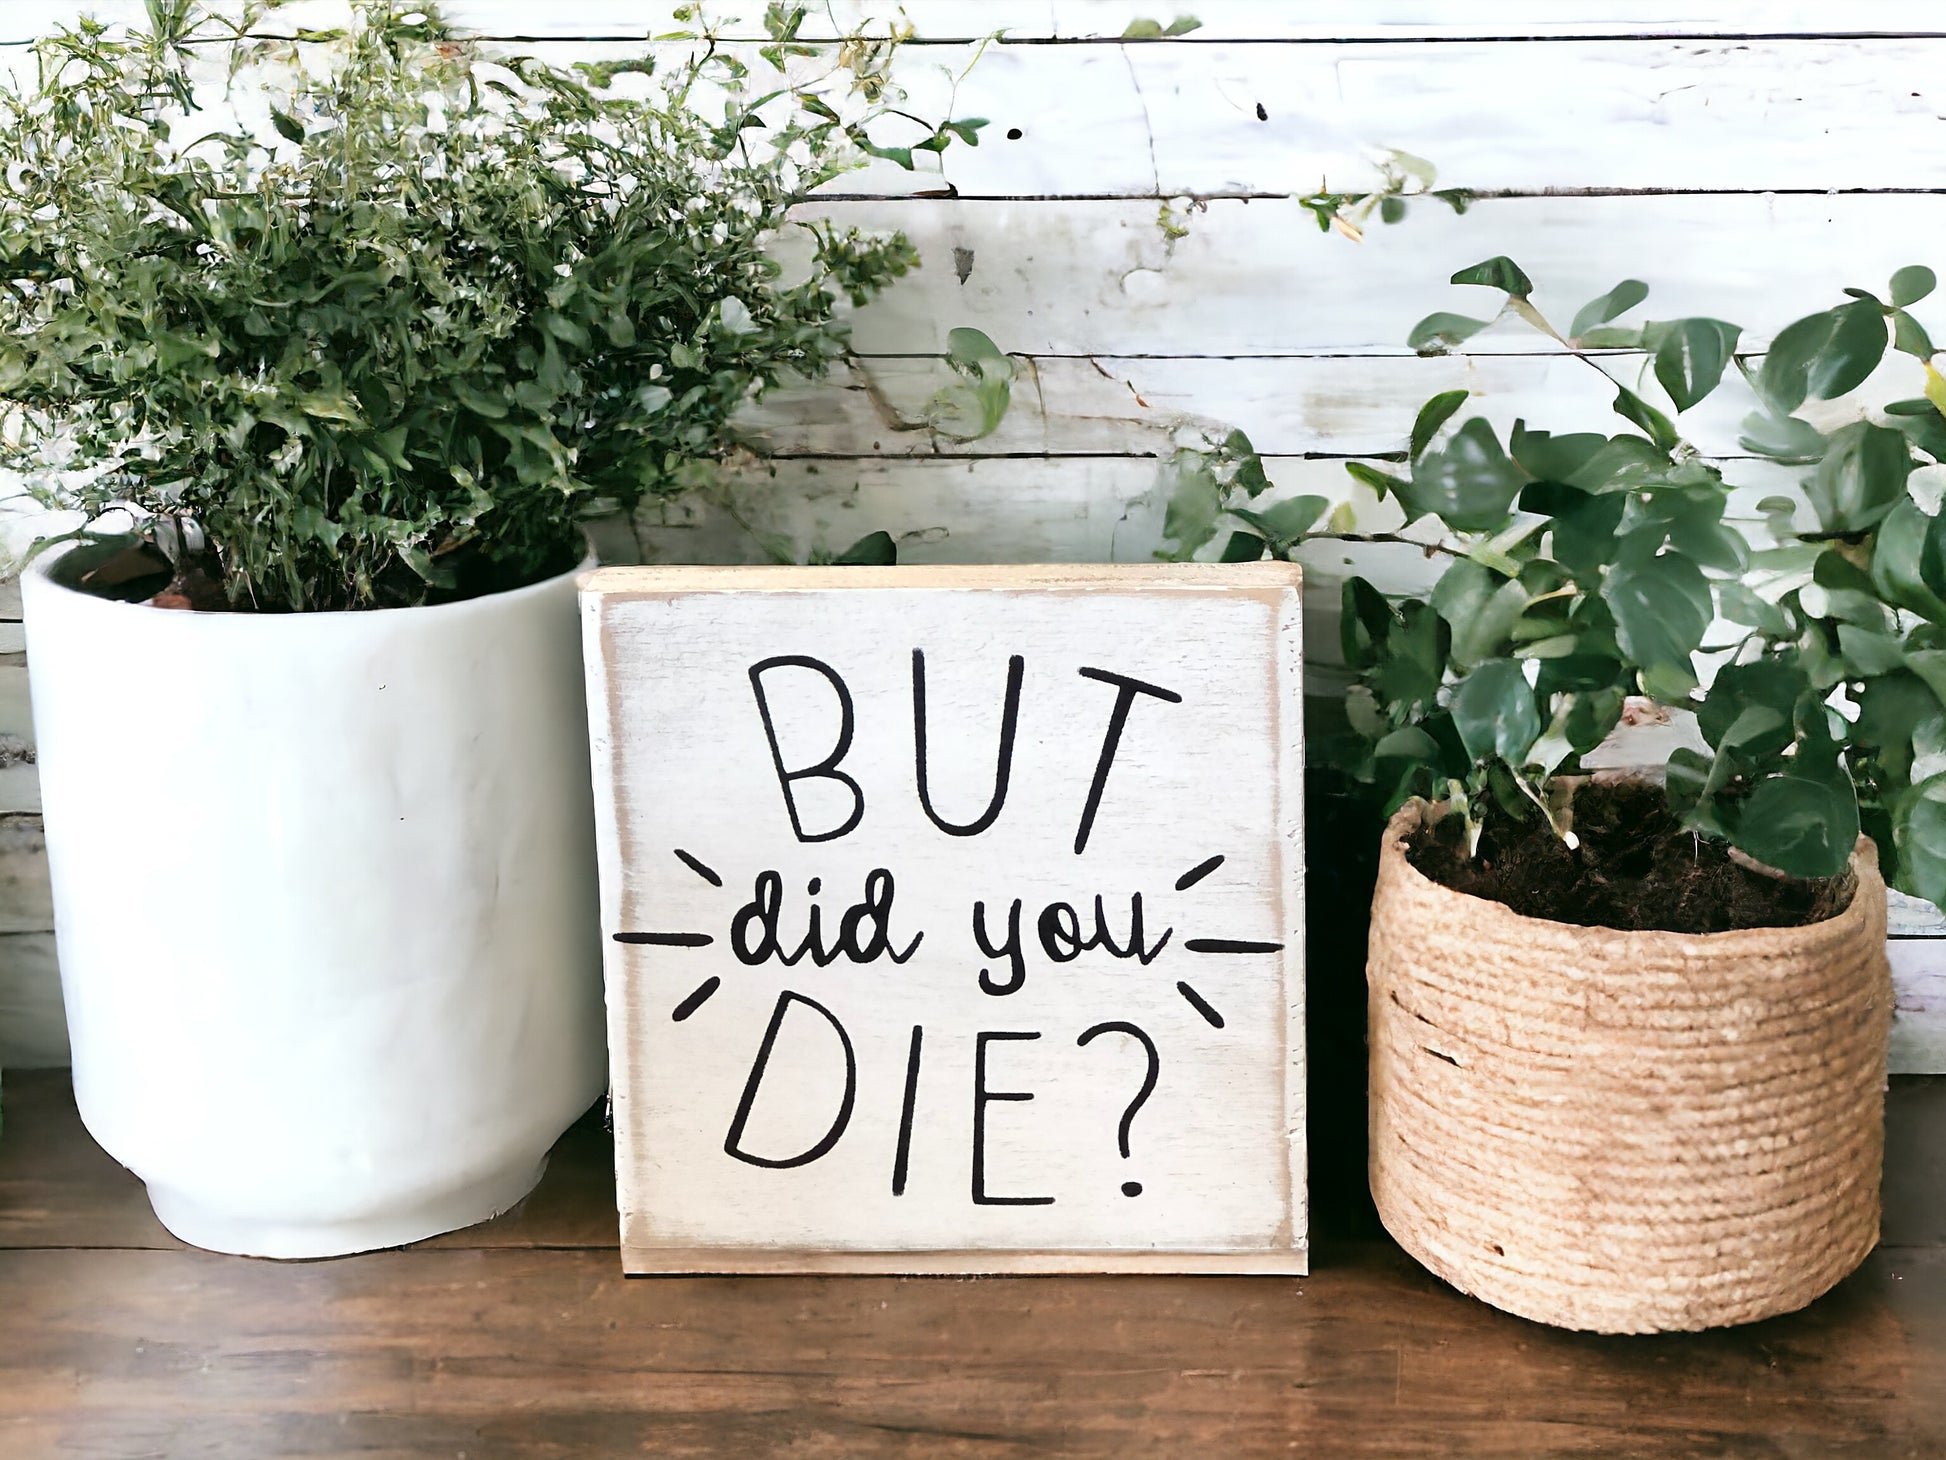 "But did you die?" wood sign